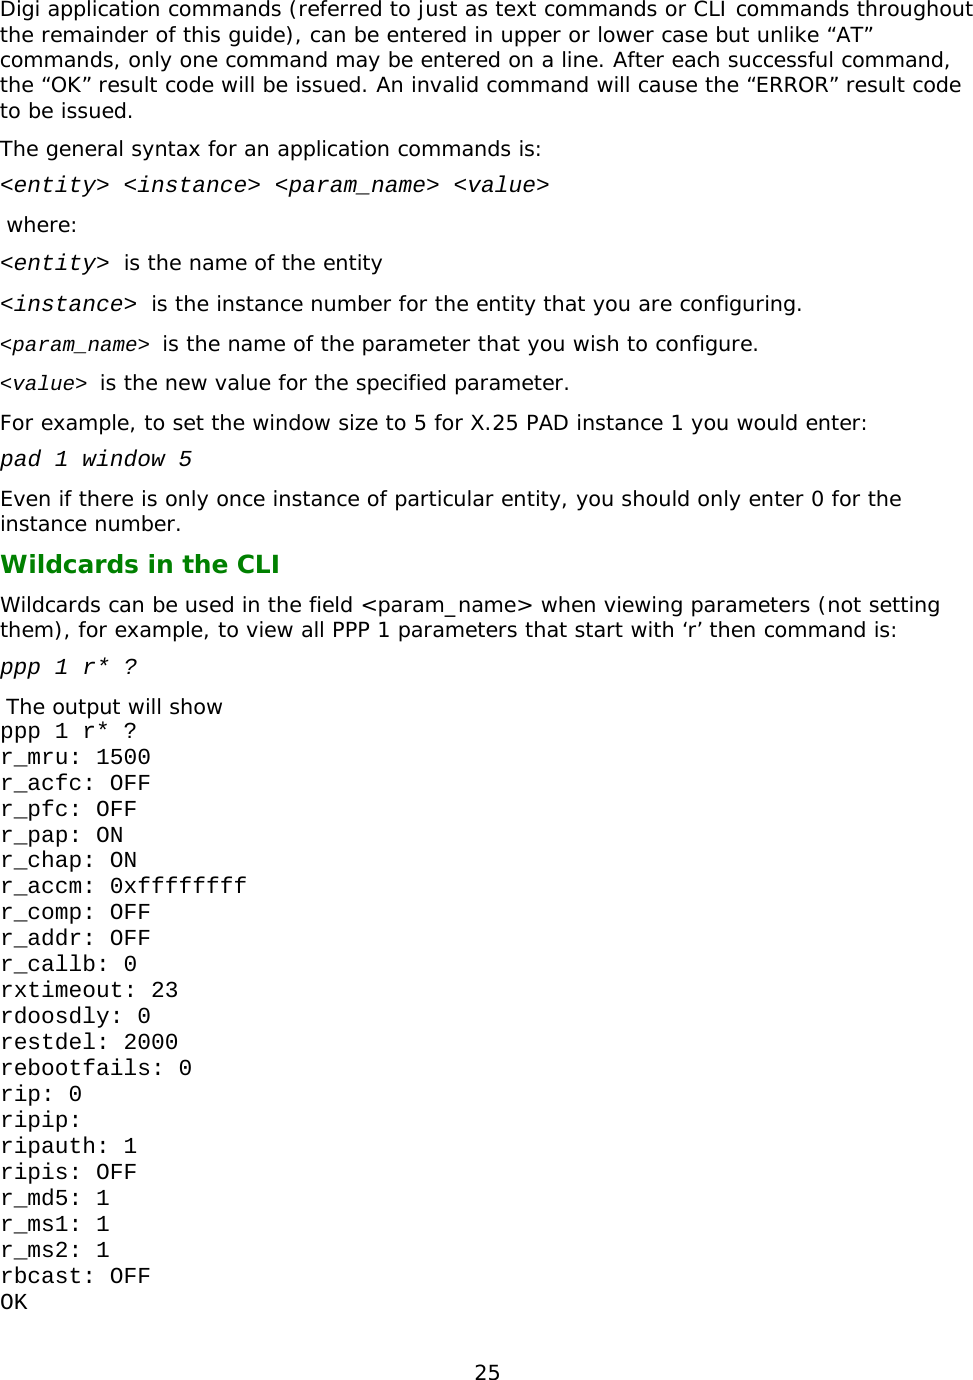 25  Digi application commands (referred to just as text commands or CLI commands throughout the remainder of this guide), can be entered in upper or lower case but unlike “AT” commands, only one command may be entered on a line. After each successful command, the “OK” result code will be issued. An invalid command will cause the “ERROR” result code to be issued.  The general syntax for an application commands is: &lt;entity&gt; &lt;instance&gt; &lt;param_name&gt; &lt;value&gt;  where: &lt;entity&gt; is the name of the entity &lt;instance&gt; is the instance number for the entity that you are configuring. &lt;param_name&gt; is the name of the parameter that you wish to configure. &lt;value&gt; is the new value for the specified parameter. For example, to set the window size to 5 for X.25 PAD instance 1 you would enter: pad 1 window 5 Even if there is only once instance of particular entity, you should only enter 0 for the instance number. Wildcards in the CLI Wildcards can be used in the field &lt;param_name&gt; when viewing parameters (not setting them), for example, to view all PPP 1 parameters that start with ‘r’ then command is: ppp 1 r* ?  The output will show ppp 1 r* ? r_mru: 1500 r_acfc: OFF r_pfc: OFF r_pap: ON r_chap: ON r_accm: 0xffffffff r_comp: OFF r_addr: OFF r_callb: 0 rxtimeout: 23 rdoosdly: 0 restdel: 2000 rebootfails: 0 rip: 0 ripip: ripauth: 1 ripis: OFF r_md5: 1 r_ms1: 1 r_ms2: 1 rbcast: OFF OK 